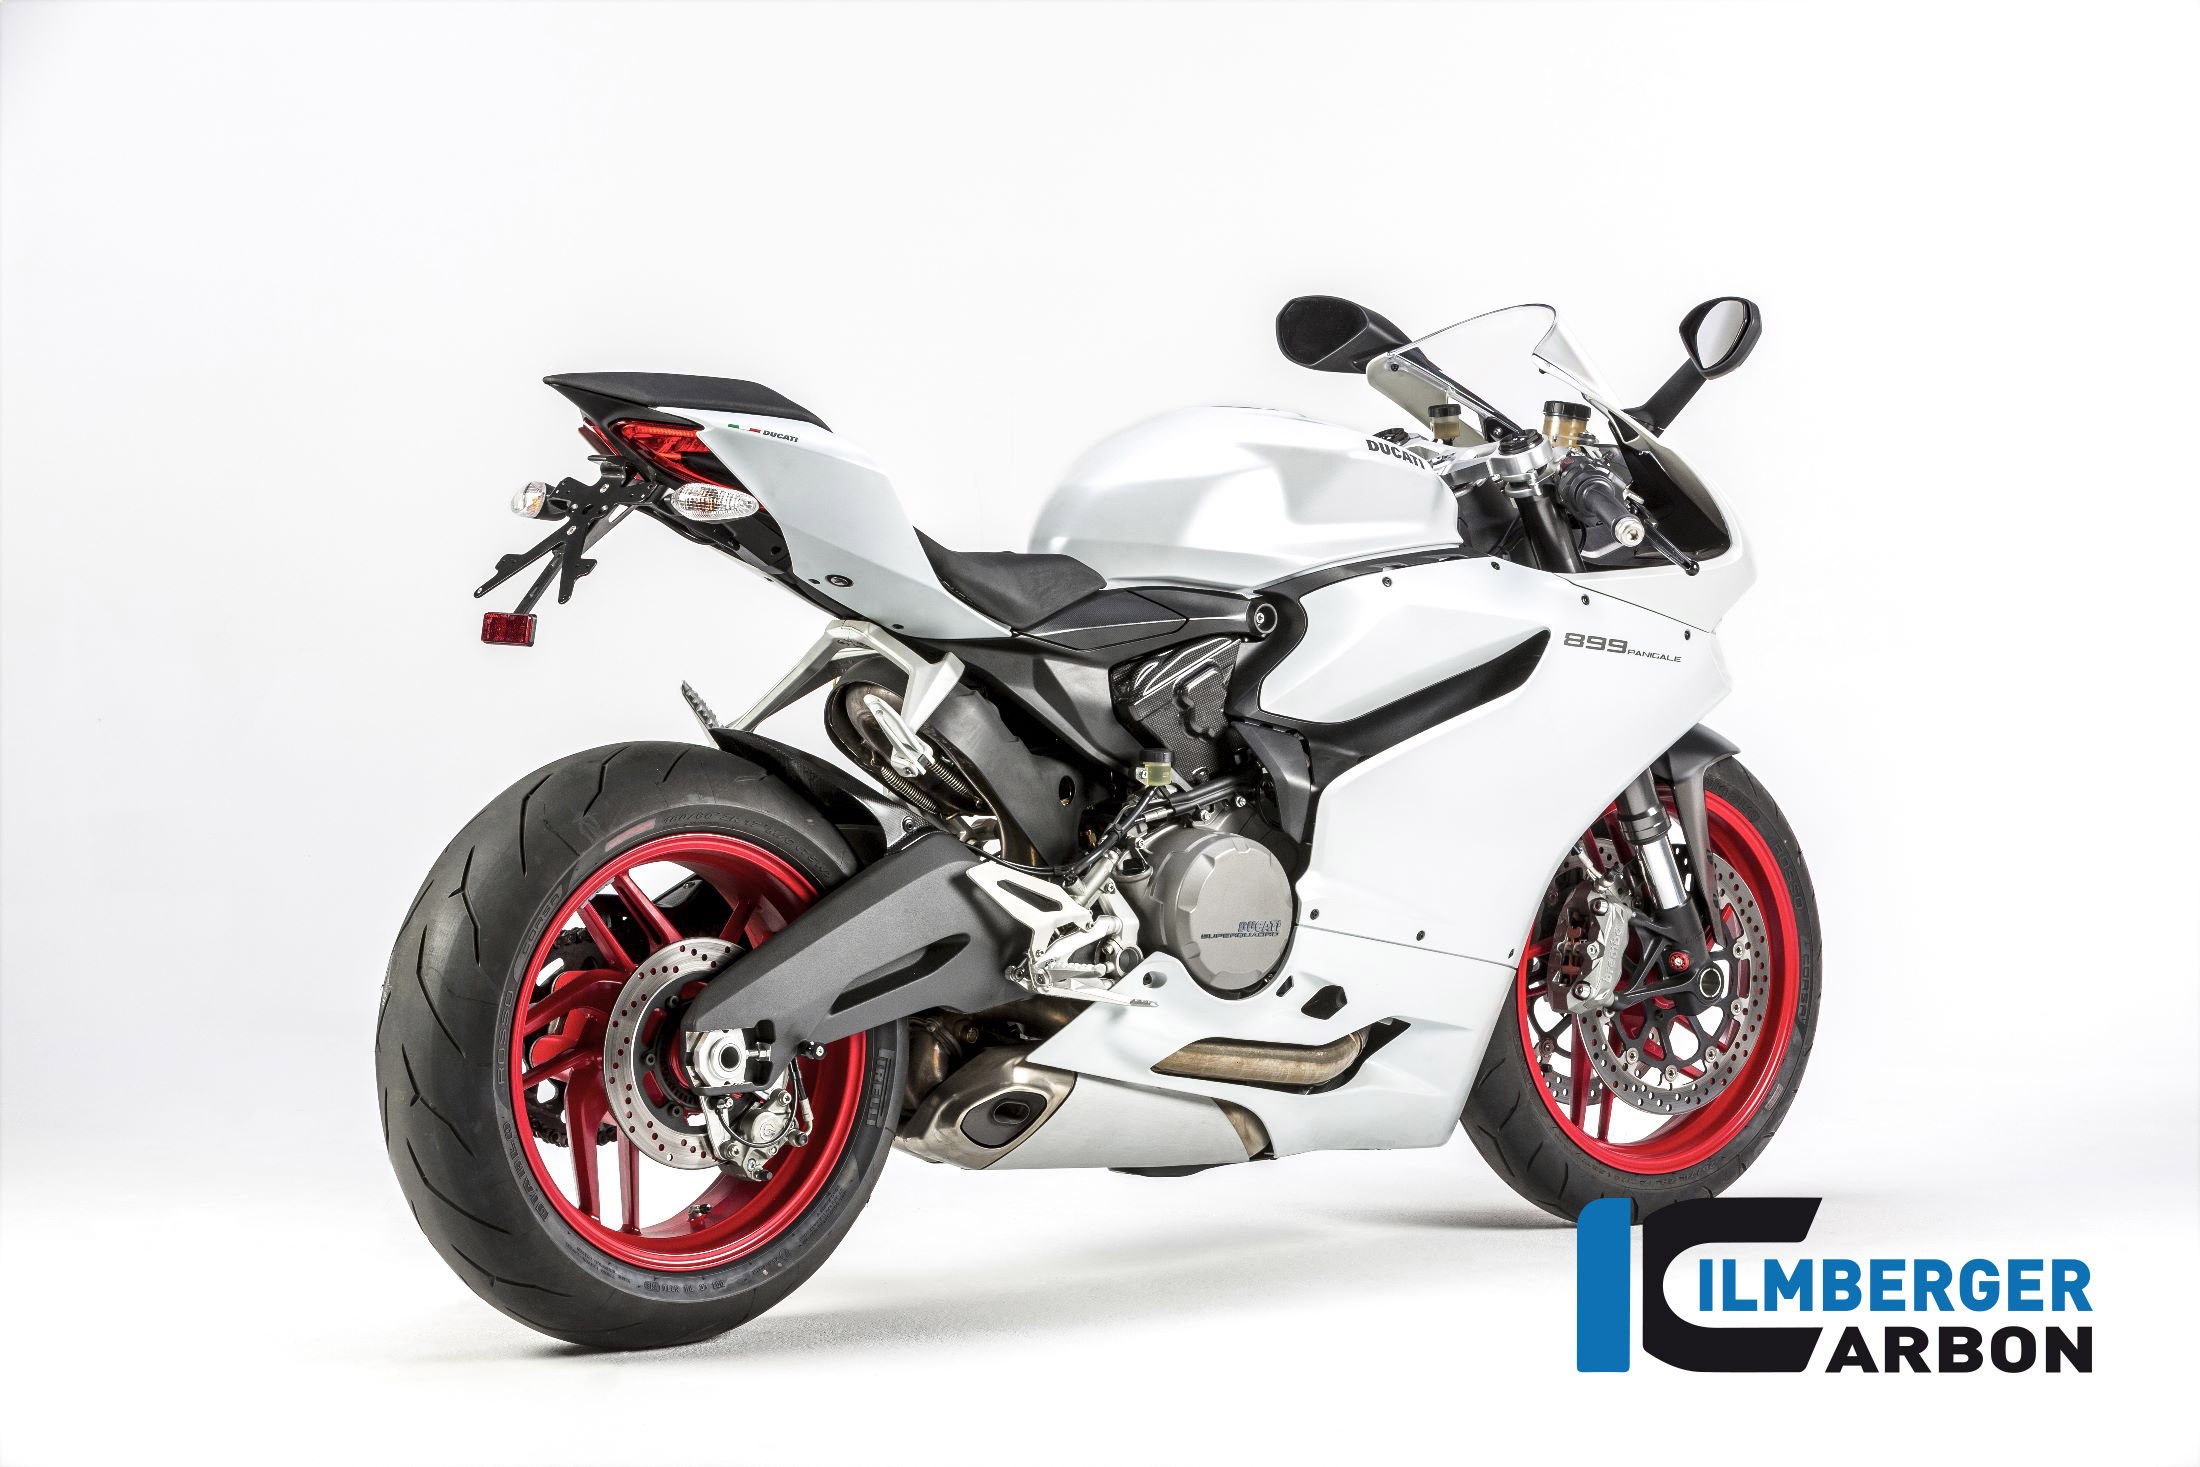 Panigale 959 Ilmberger Carbon